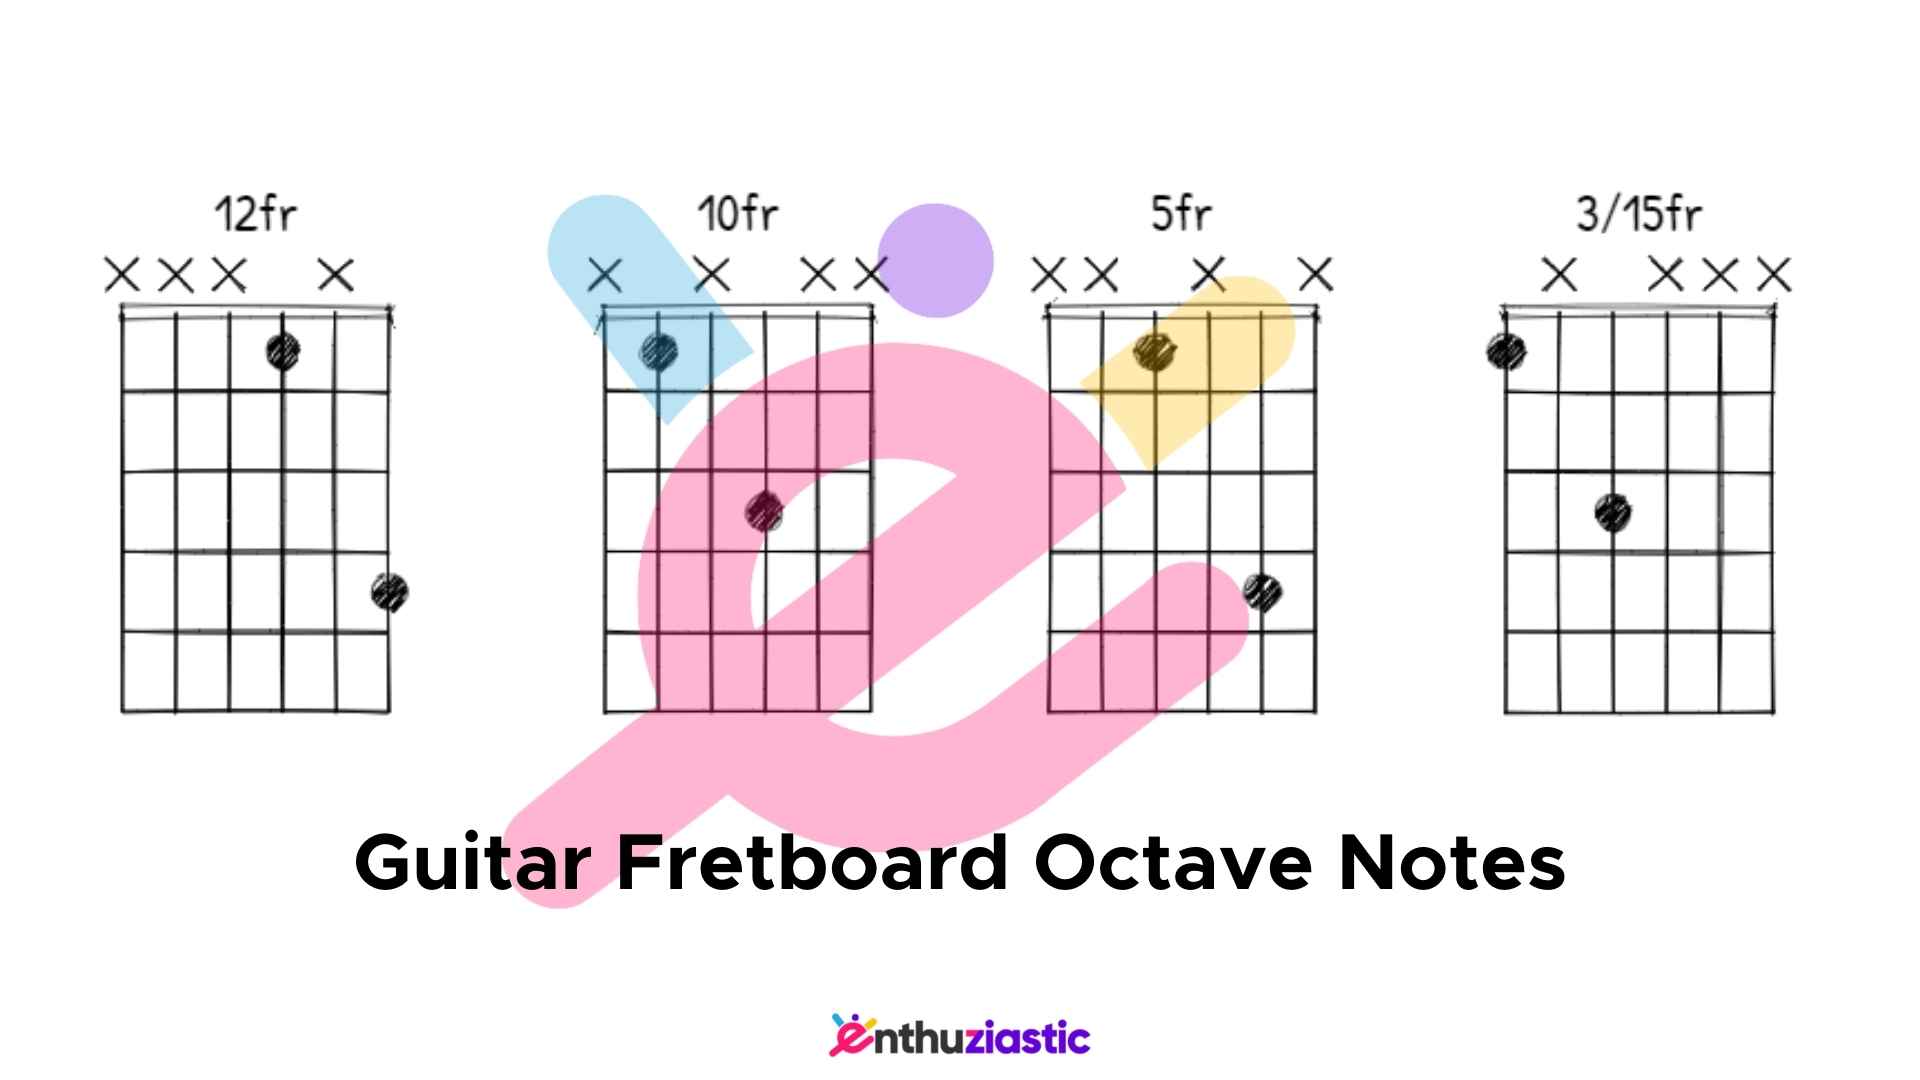 octave notes on a fretboard